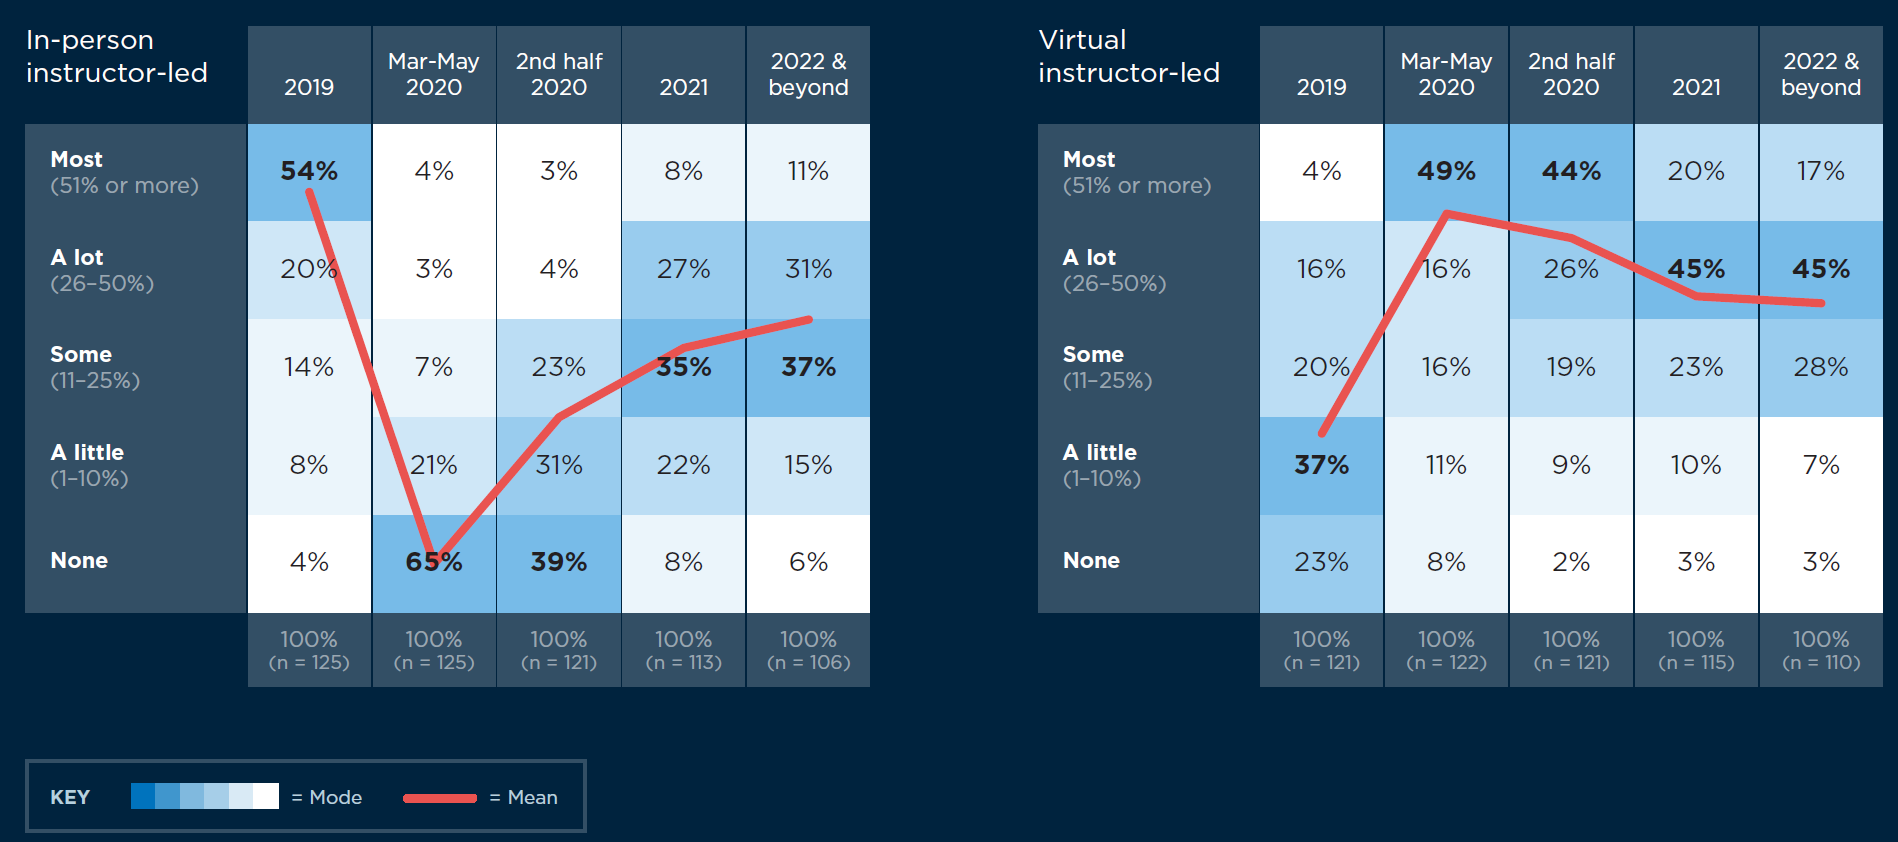 Respondents moved quickly from a live classroom model to virtual classroom, and the changes are predicted to persist into the future